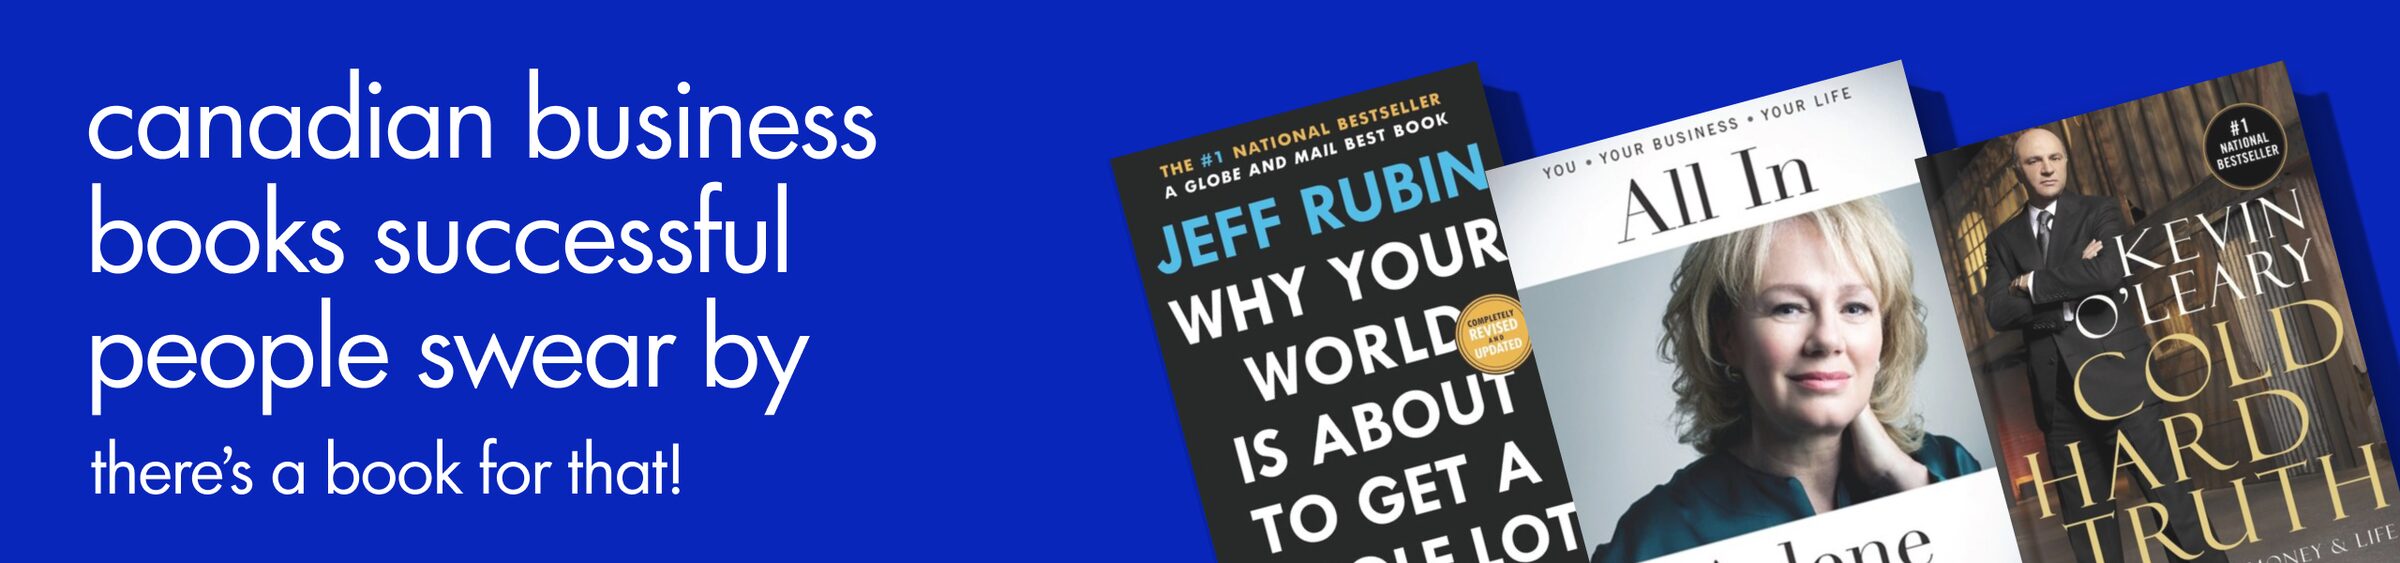 There's a Book for That - Canadian business books successful people swear by